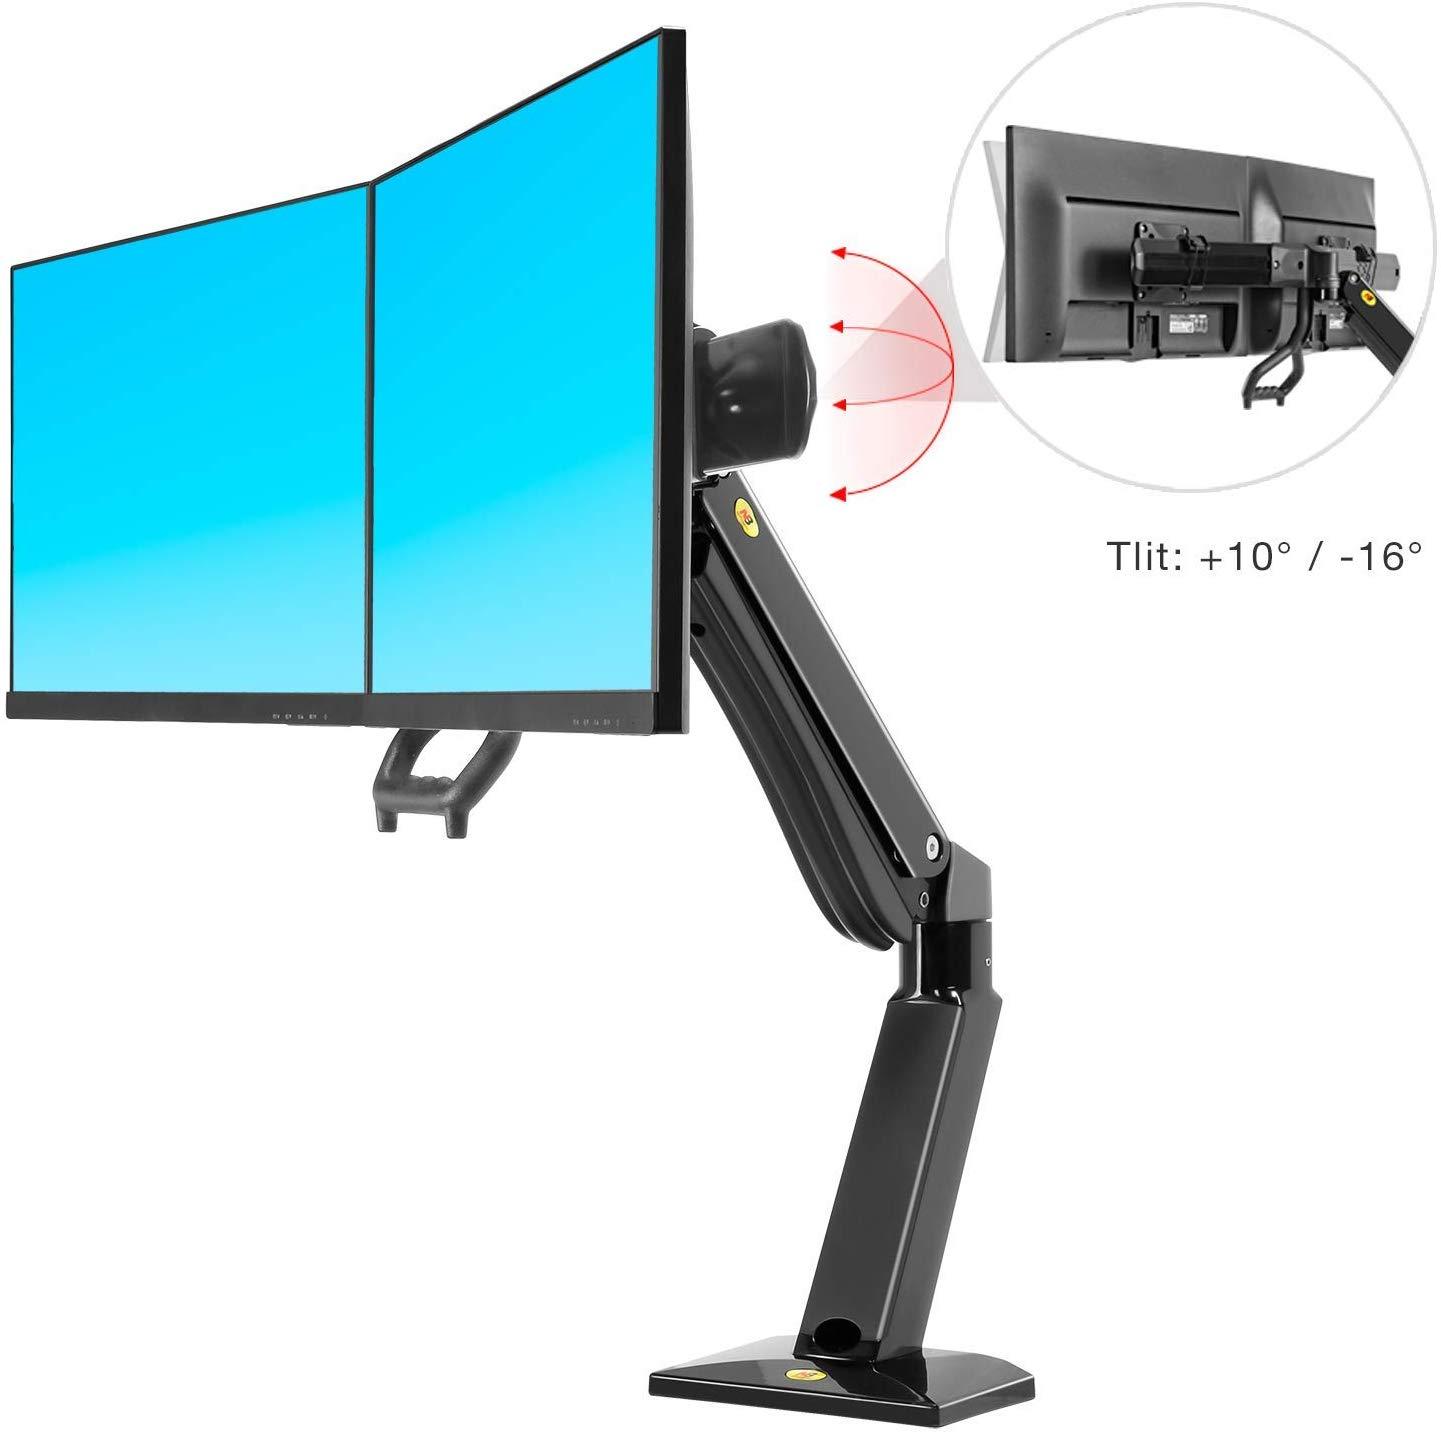 Monitor Mount Dual Desk Monitor Mount Fits 24"-32" Double Screens with Load 4.4 to 33lbs (Black) (22-32", Dual Monitor - NB